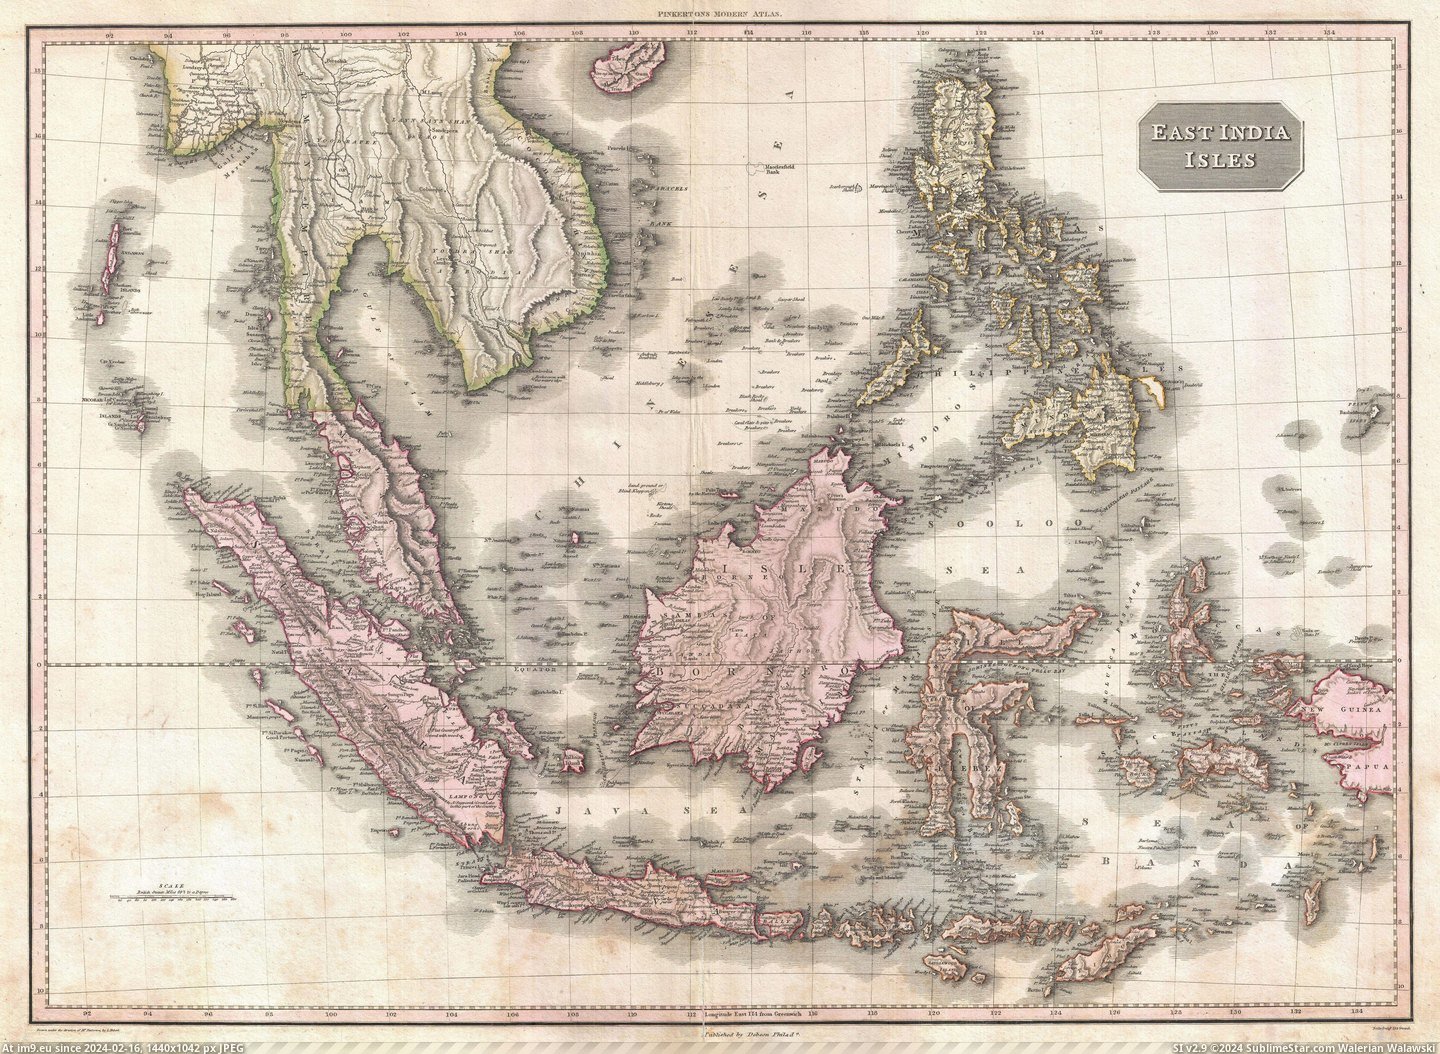 #Dutch #Indies #East [Mapporn] Dutch East Indies, 1818 [4800 x 3486] Pic. (Image of album My r/MAPS favs))